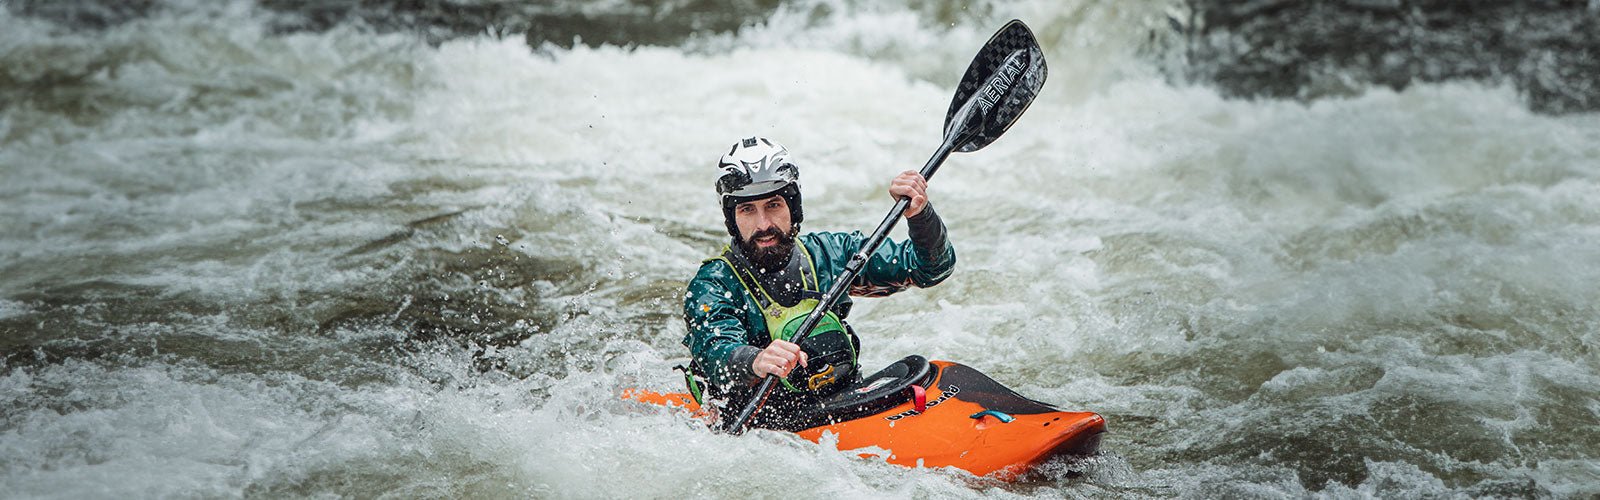 Gear Review: Aqua Bound Aerial  Whitewater Paddle - Next Adventure